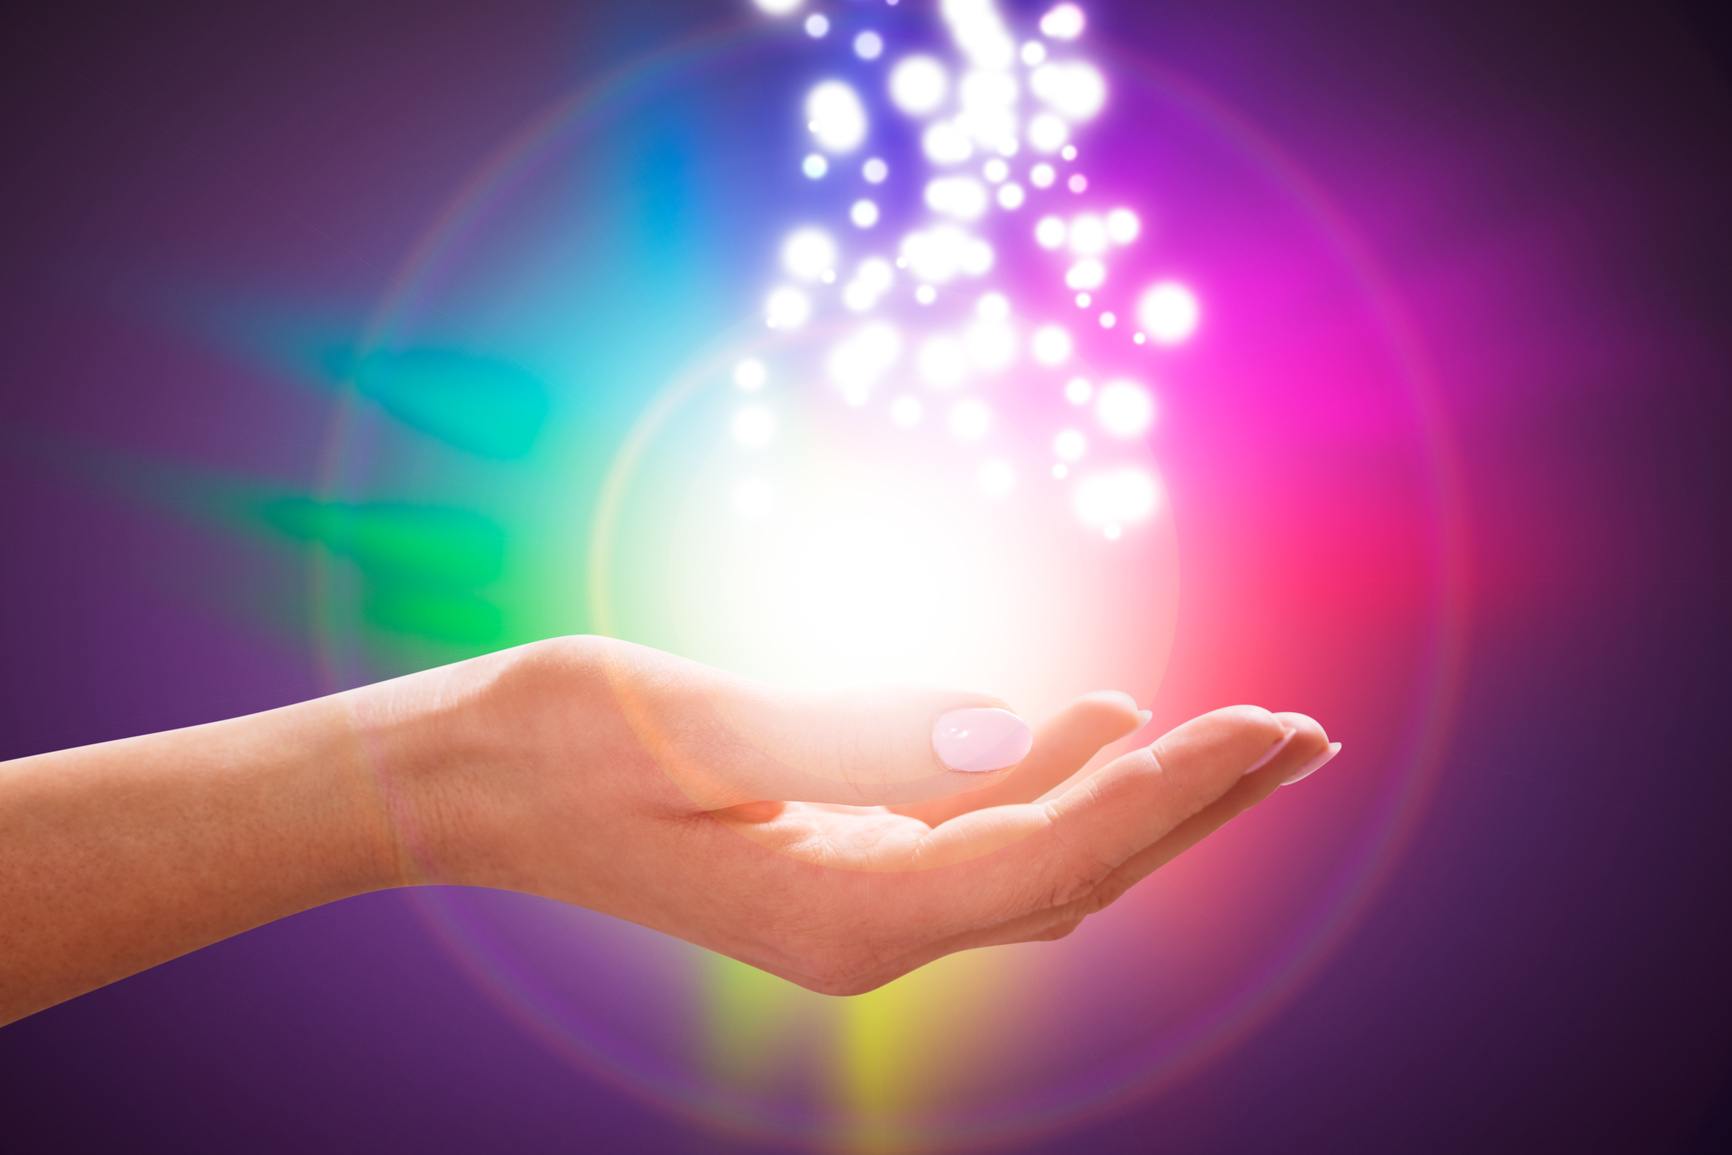 Person's Hand Into Magical Healing Energy Field